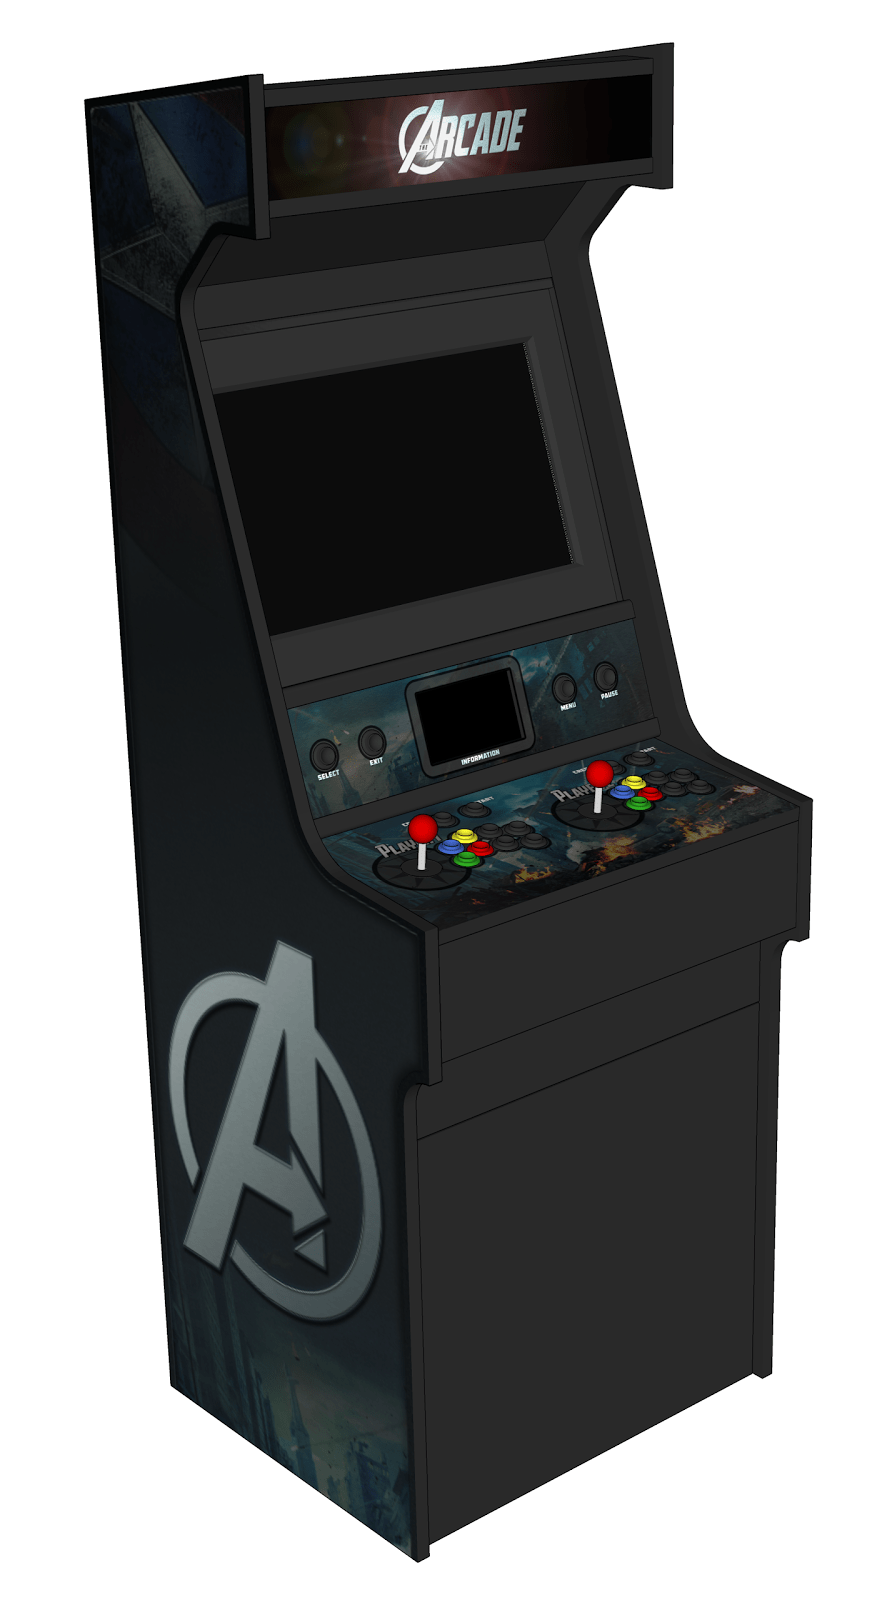 3D render of arcade cabinet as shown in Sketchup editor window